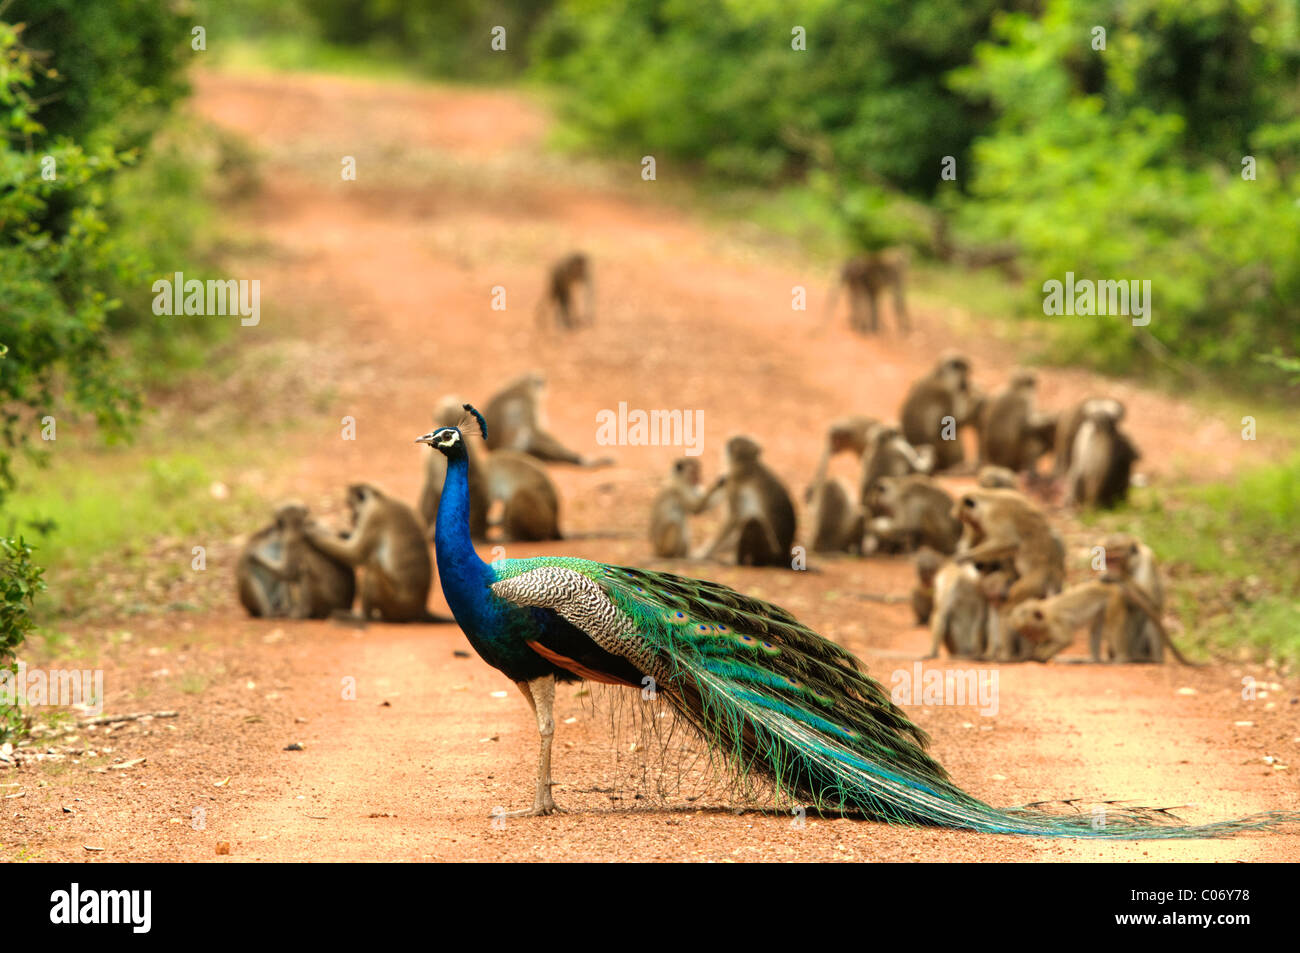 A peacock on a road in front of a group of monkeys, Yala National Park Sri Lanka Stock Photo